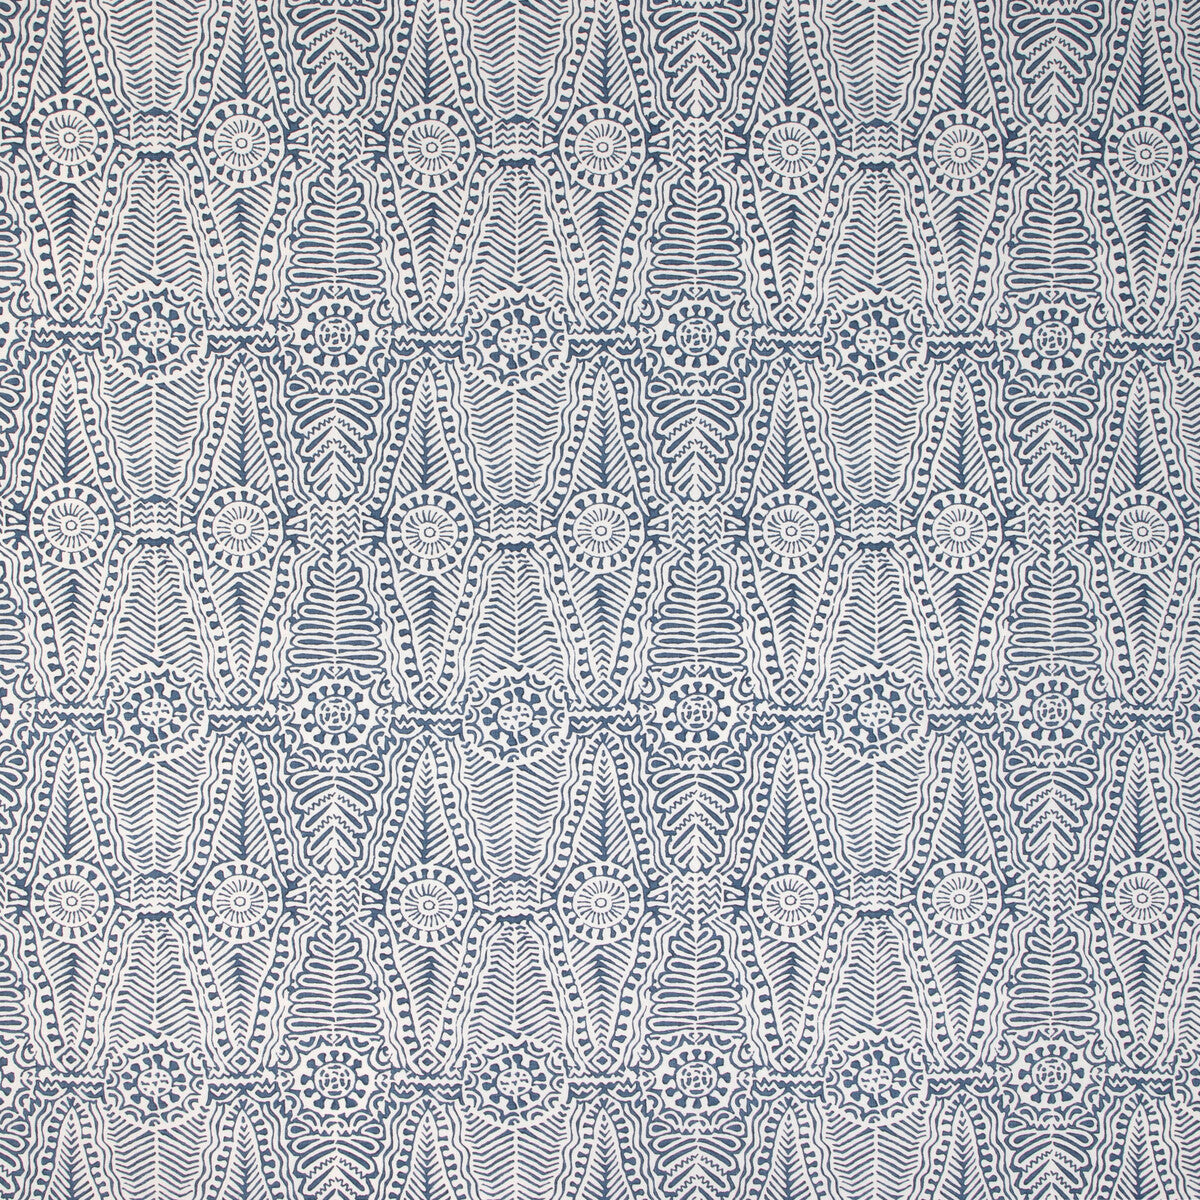 Drayton Print fabric in indigo color - pattern 2020184.50.0 - by Lee Jofa in the Clare Prints collection